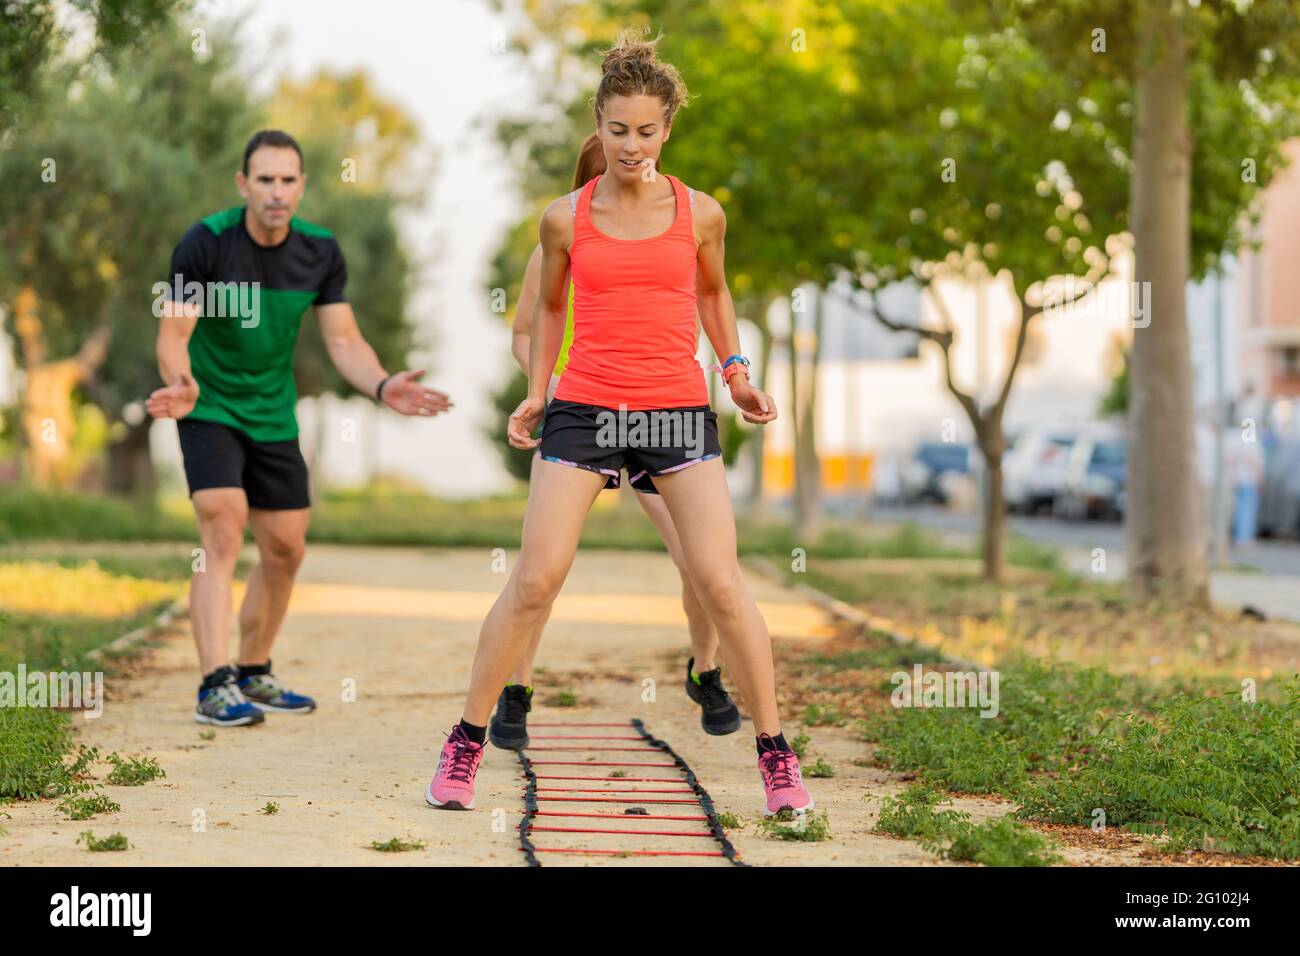 Focused woman doing fitness circuit in the park and working out with her personal trainer. Stock Photo